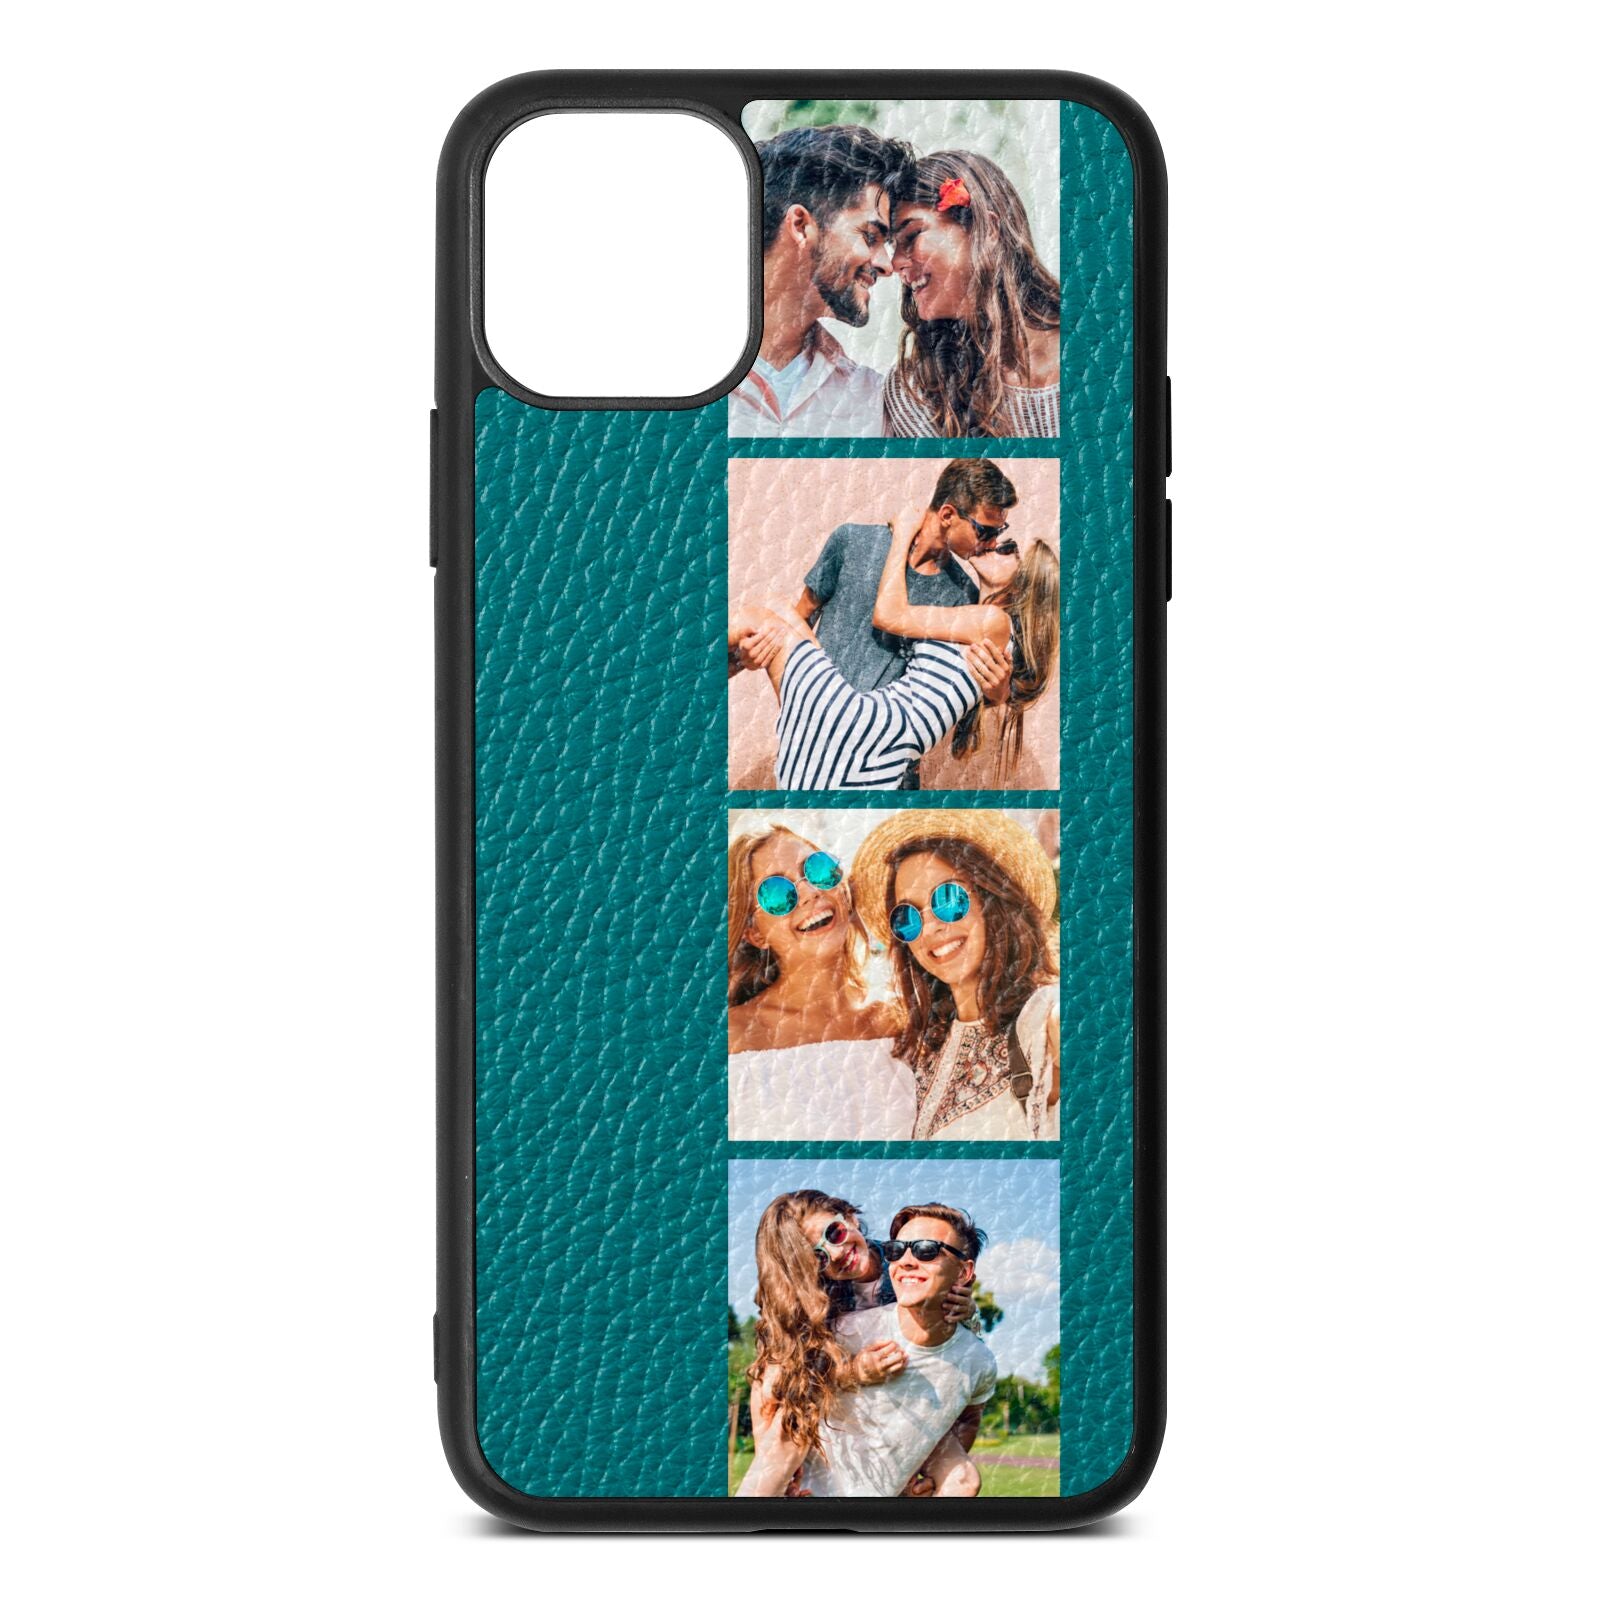 Photo Strip Montage Upload Green Pebble Leather iPhone 11 Pro Max Case